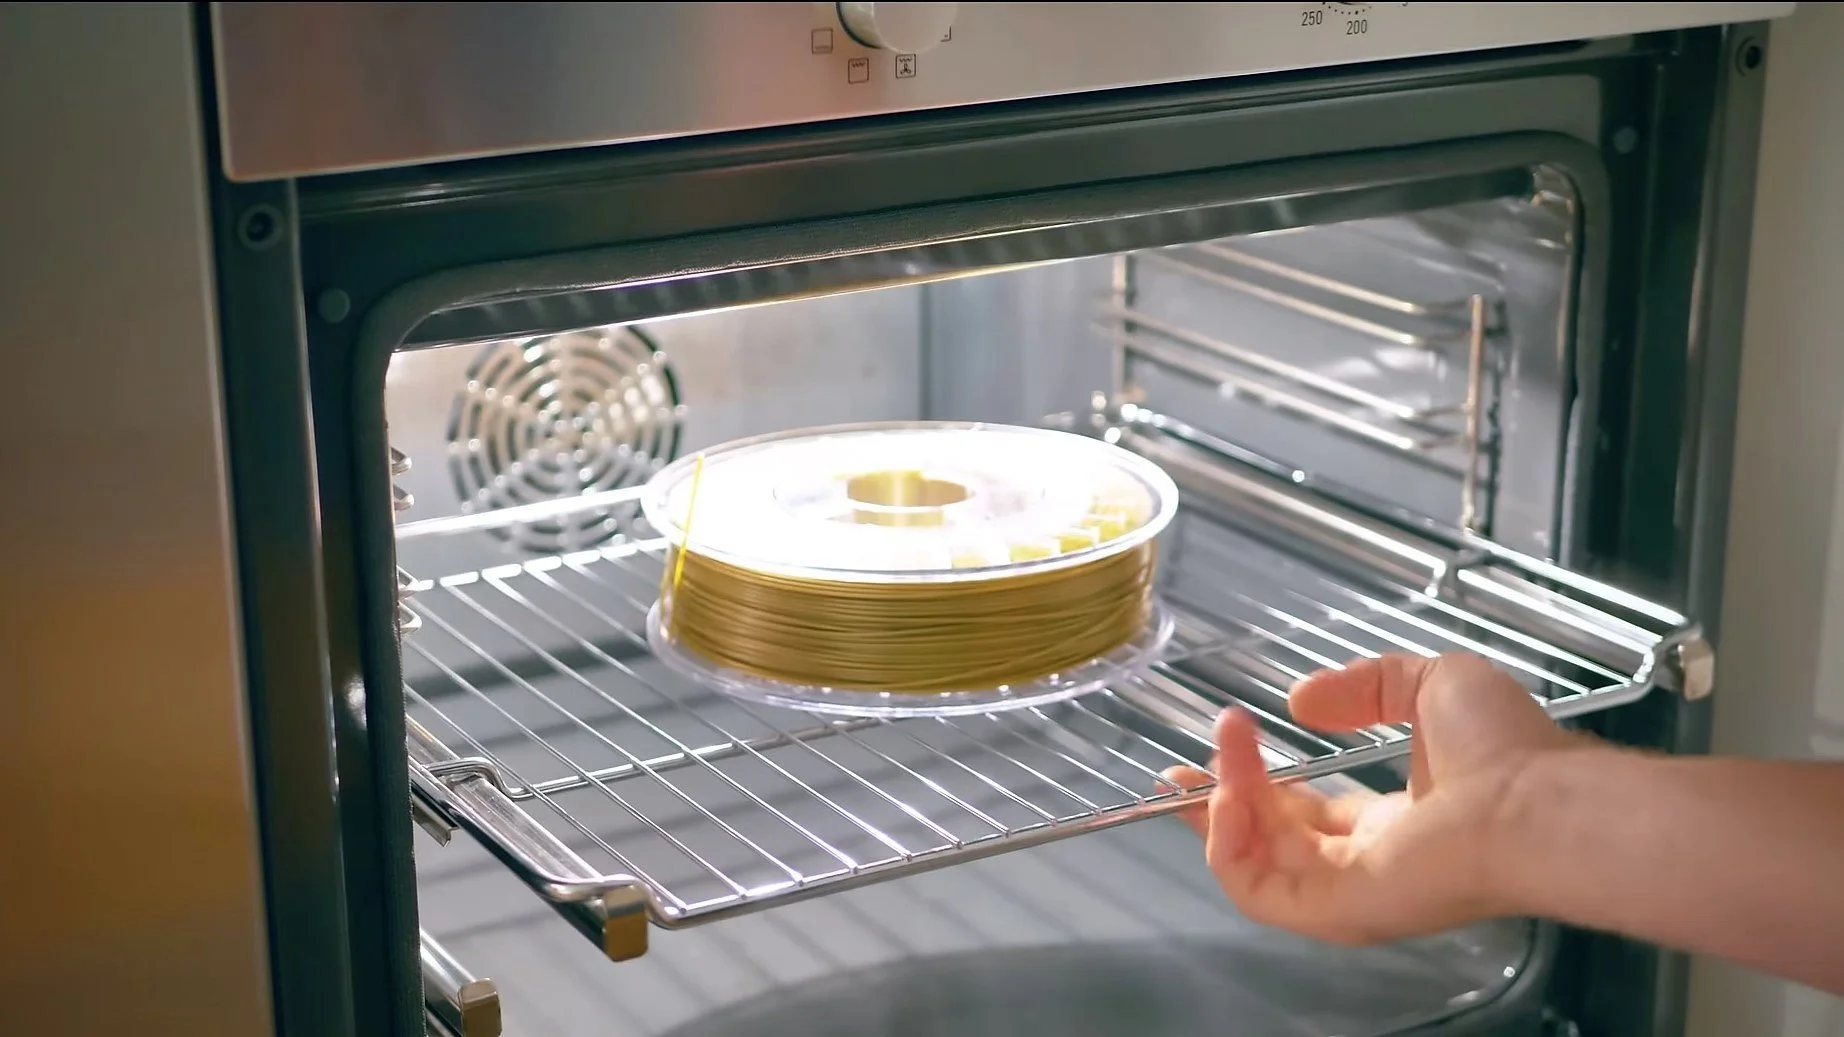 home oven for drying filaments for 3d printing